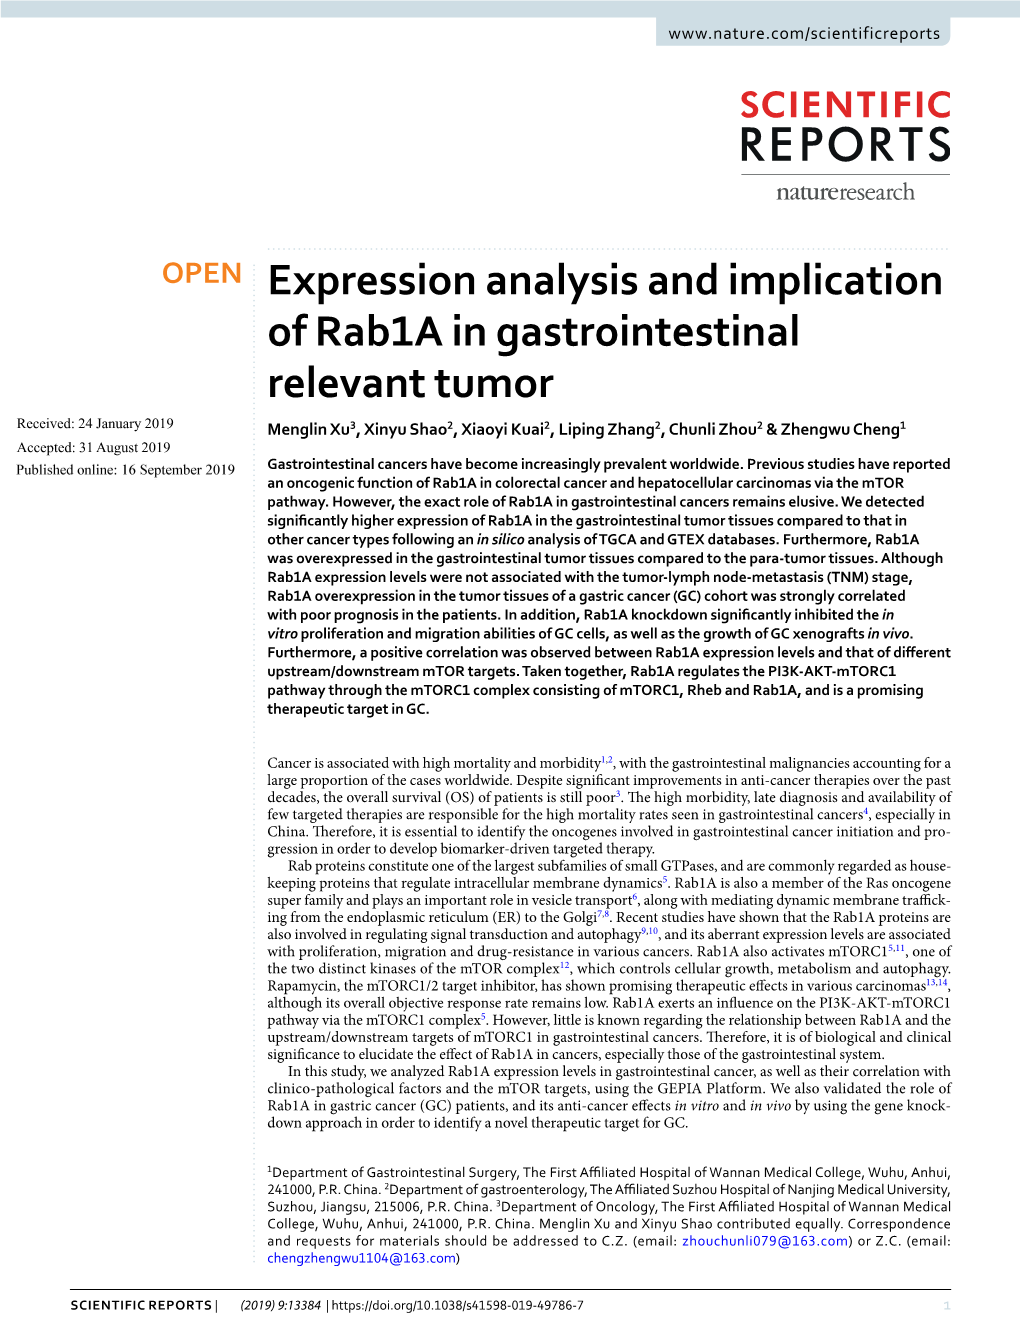 Expression Analysis and Implication of Rab1a in Gastrointestinal Relevant